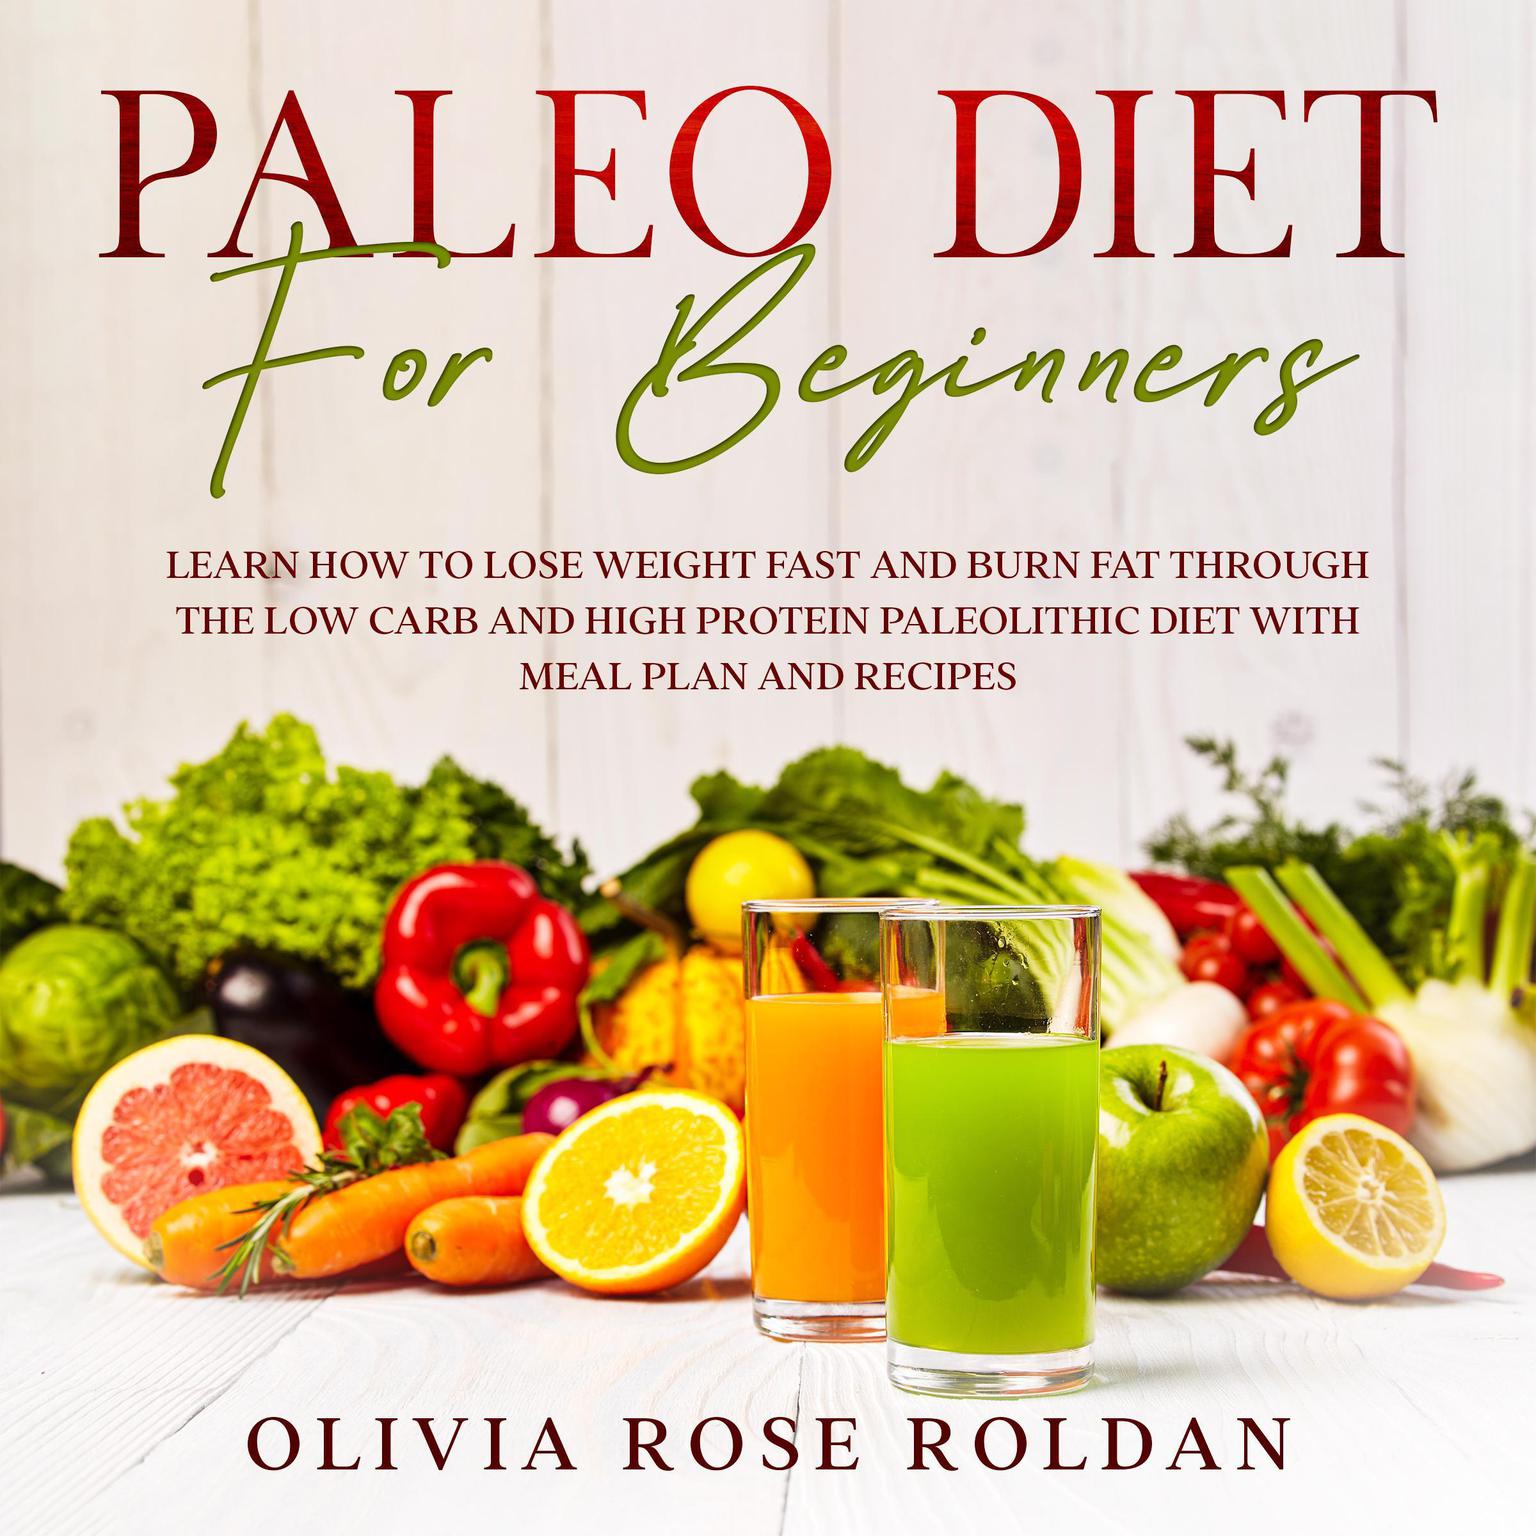 Paleo Diet for Beginners: Learn How to Lose Weight Fast and Burn Fat Through the Low Carb and High Protein Paleolithic Diet with Meal Plan and Recipes Audiobook, by Olivia Rose Roldan